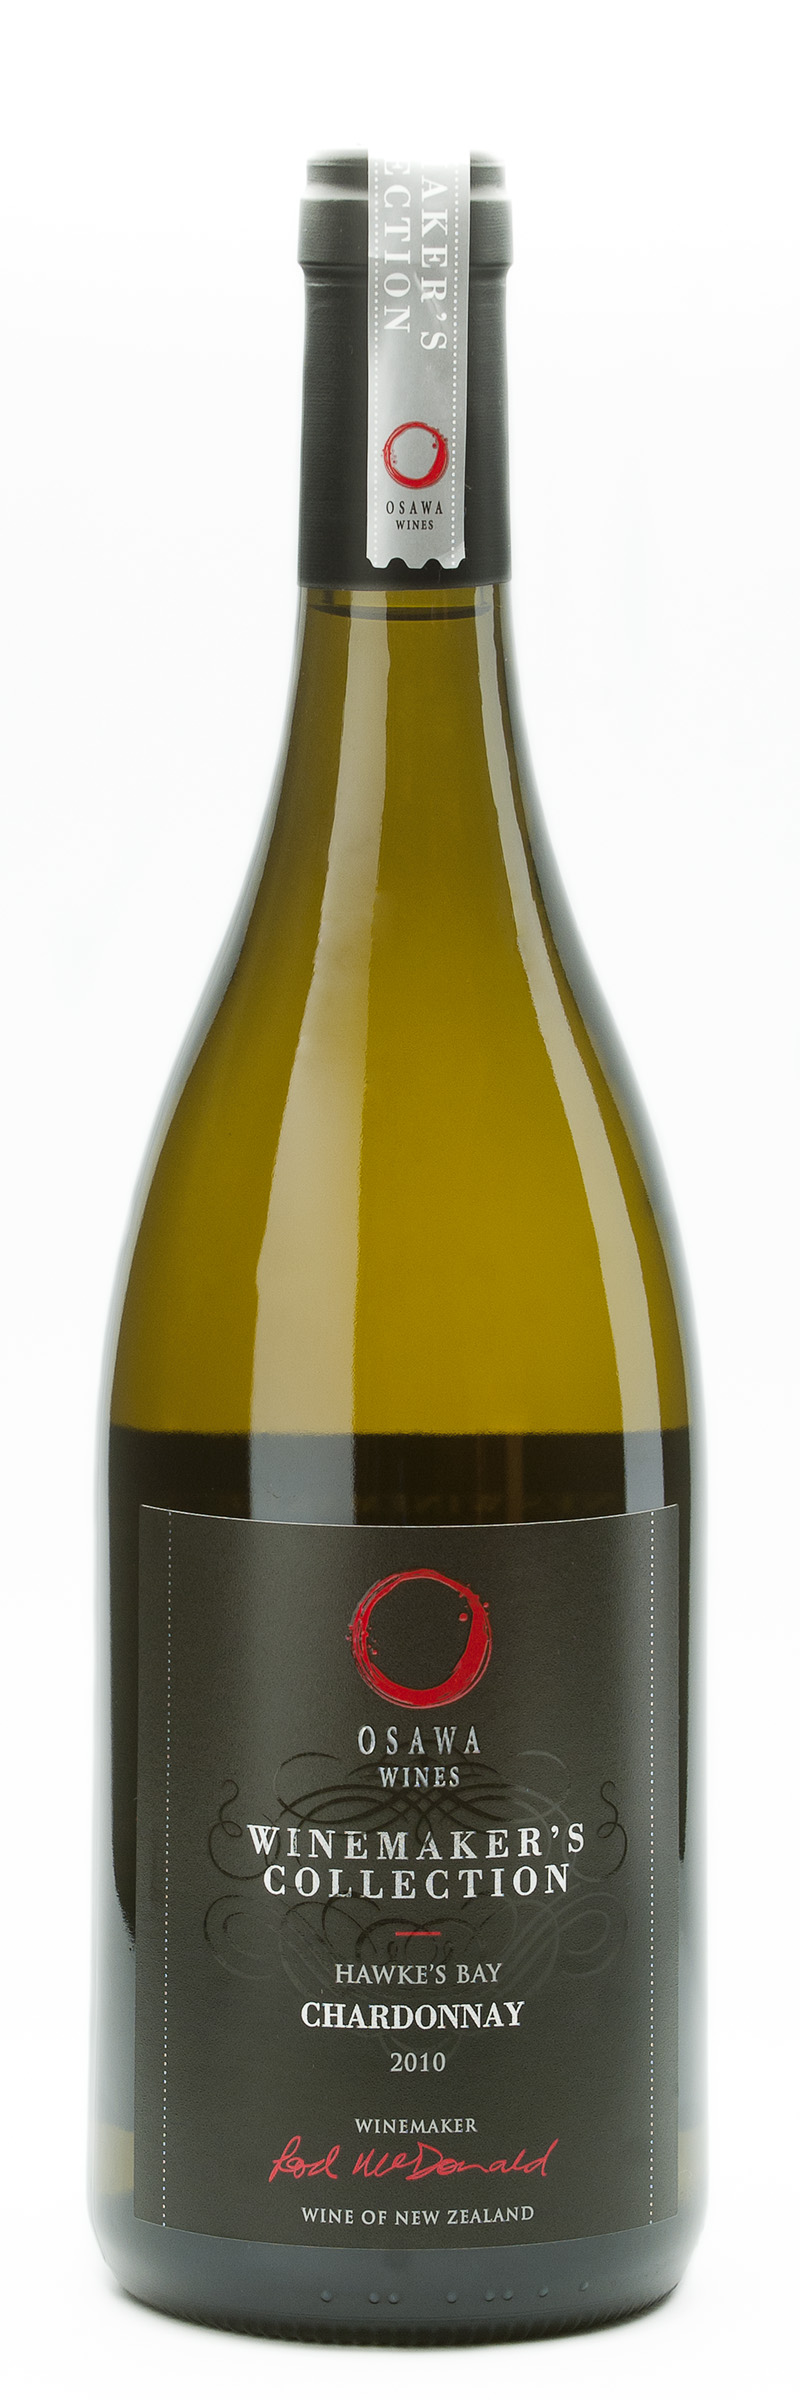 Winemaker's Collection Chardonnay